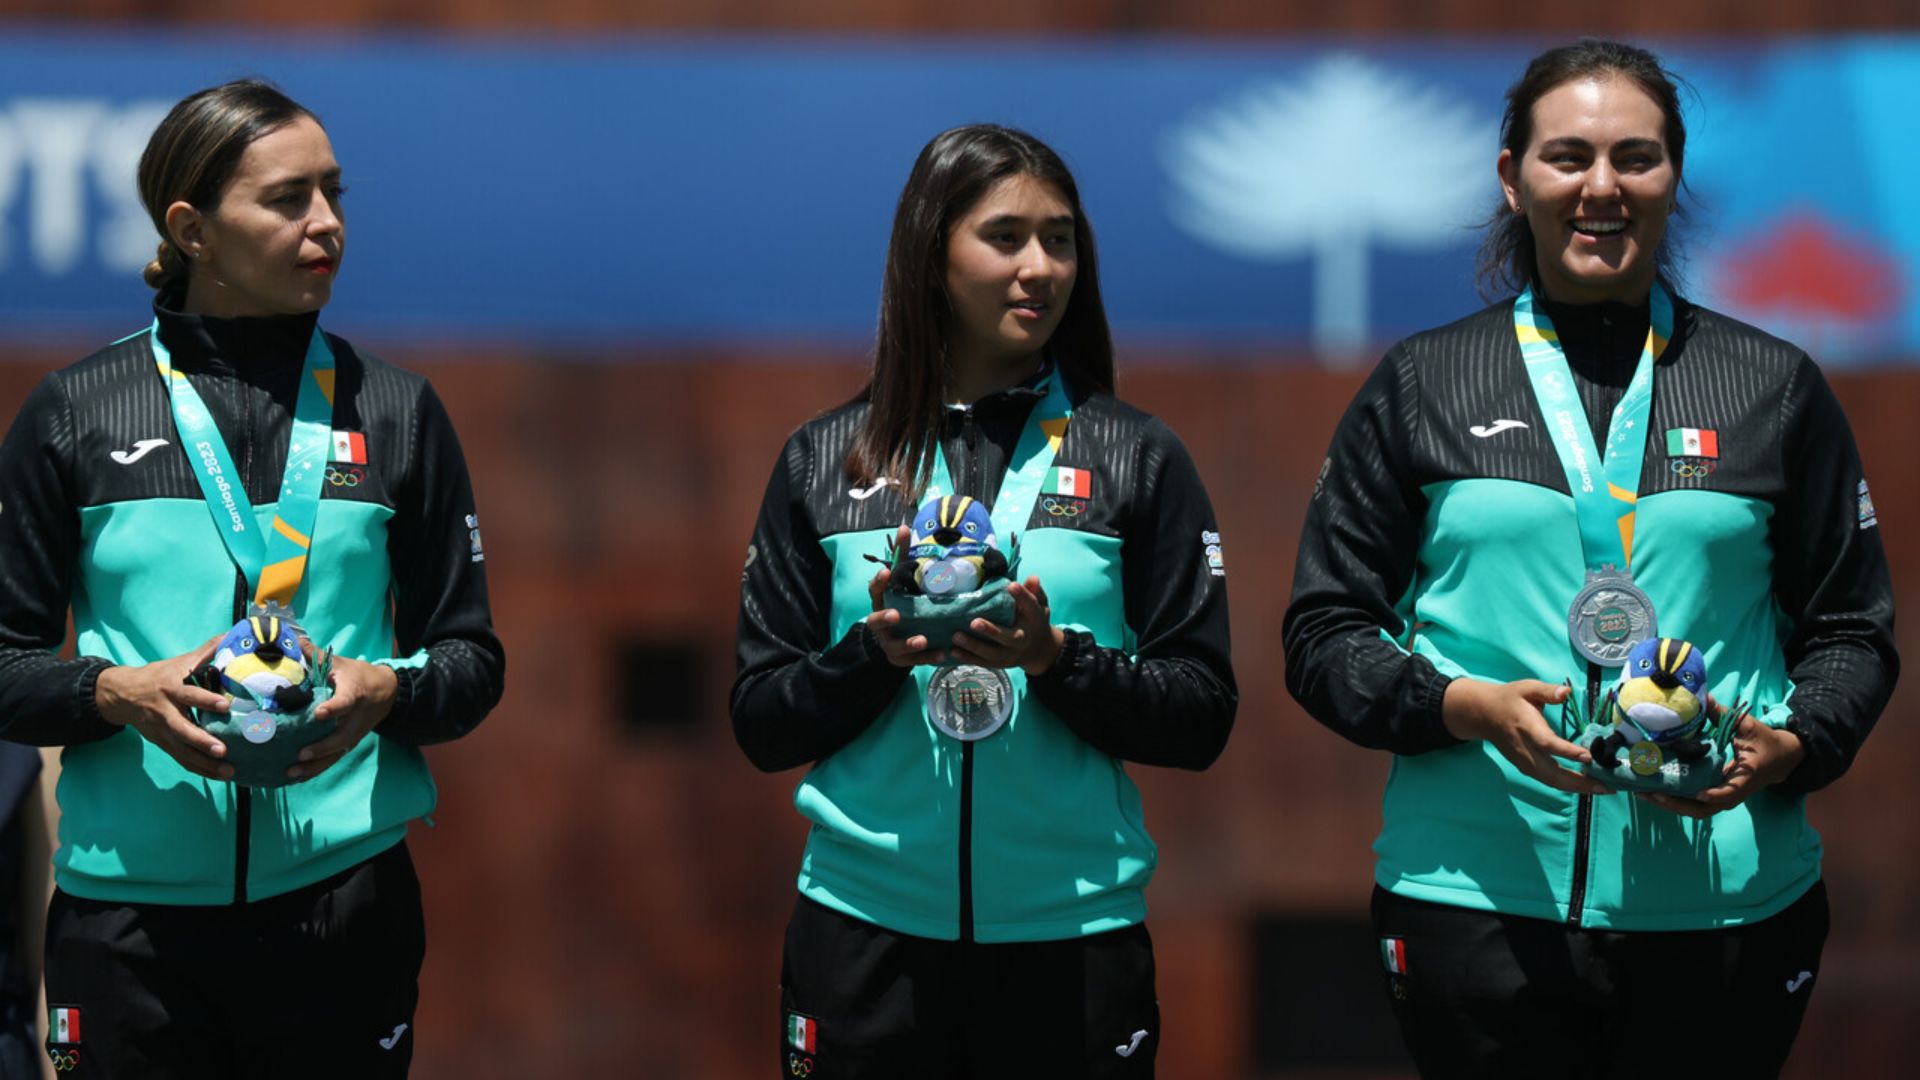 Archery: Mexico Earns Bronze in Mixed Recurve